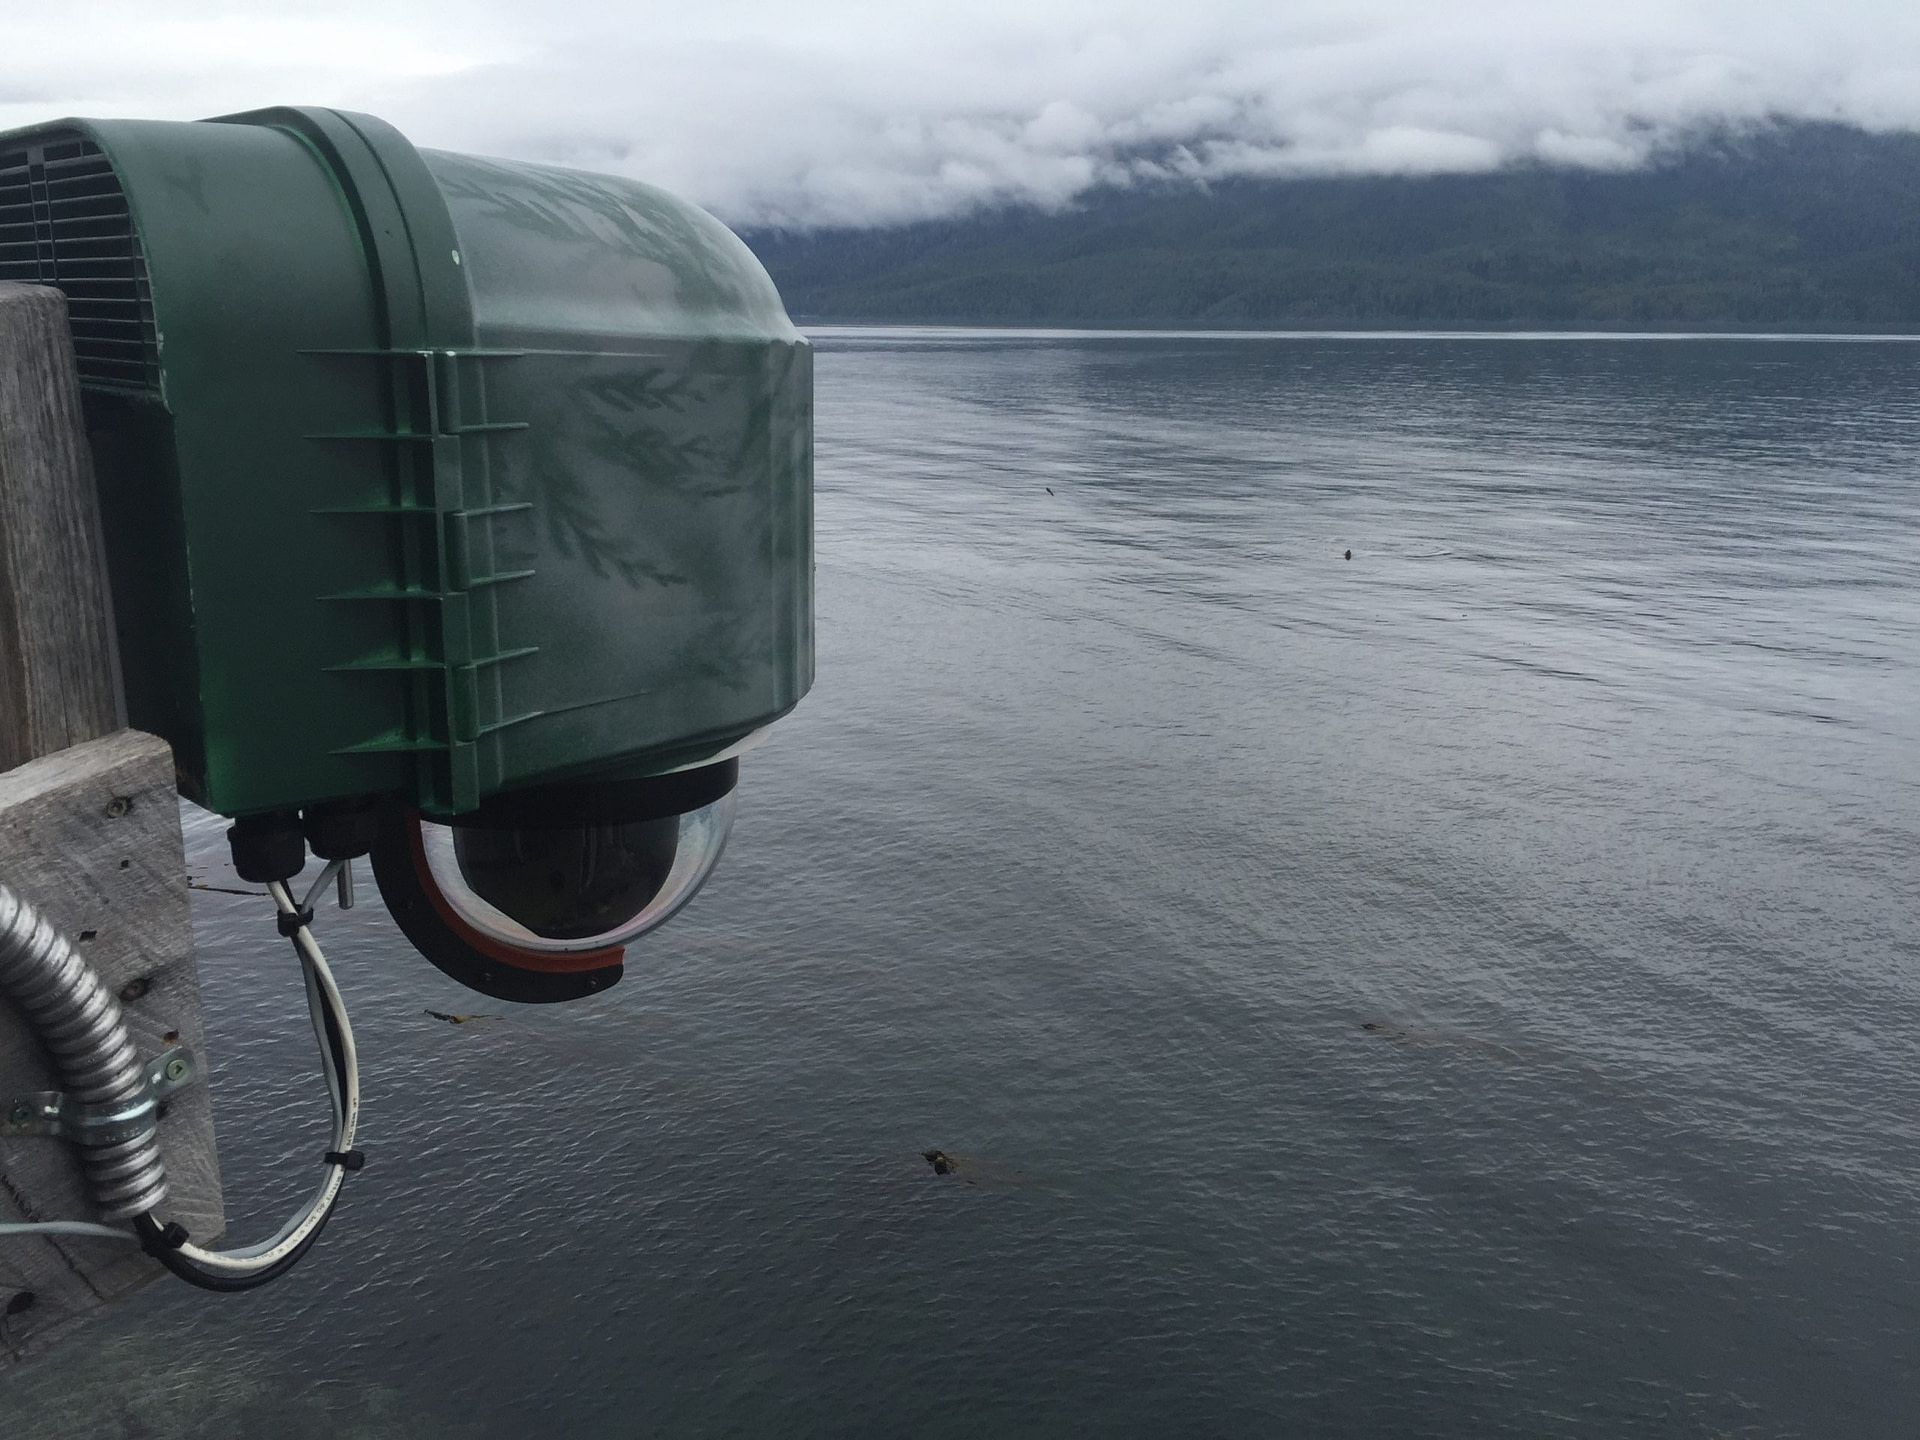 XRain Self Wiping Camera Enclosure System Installed At Critical Point With Orcalab Overlooking Resident Orcas In Johnstone Strait In British Columbia Canada 